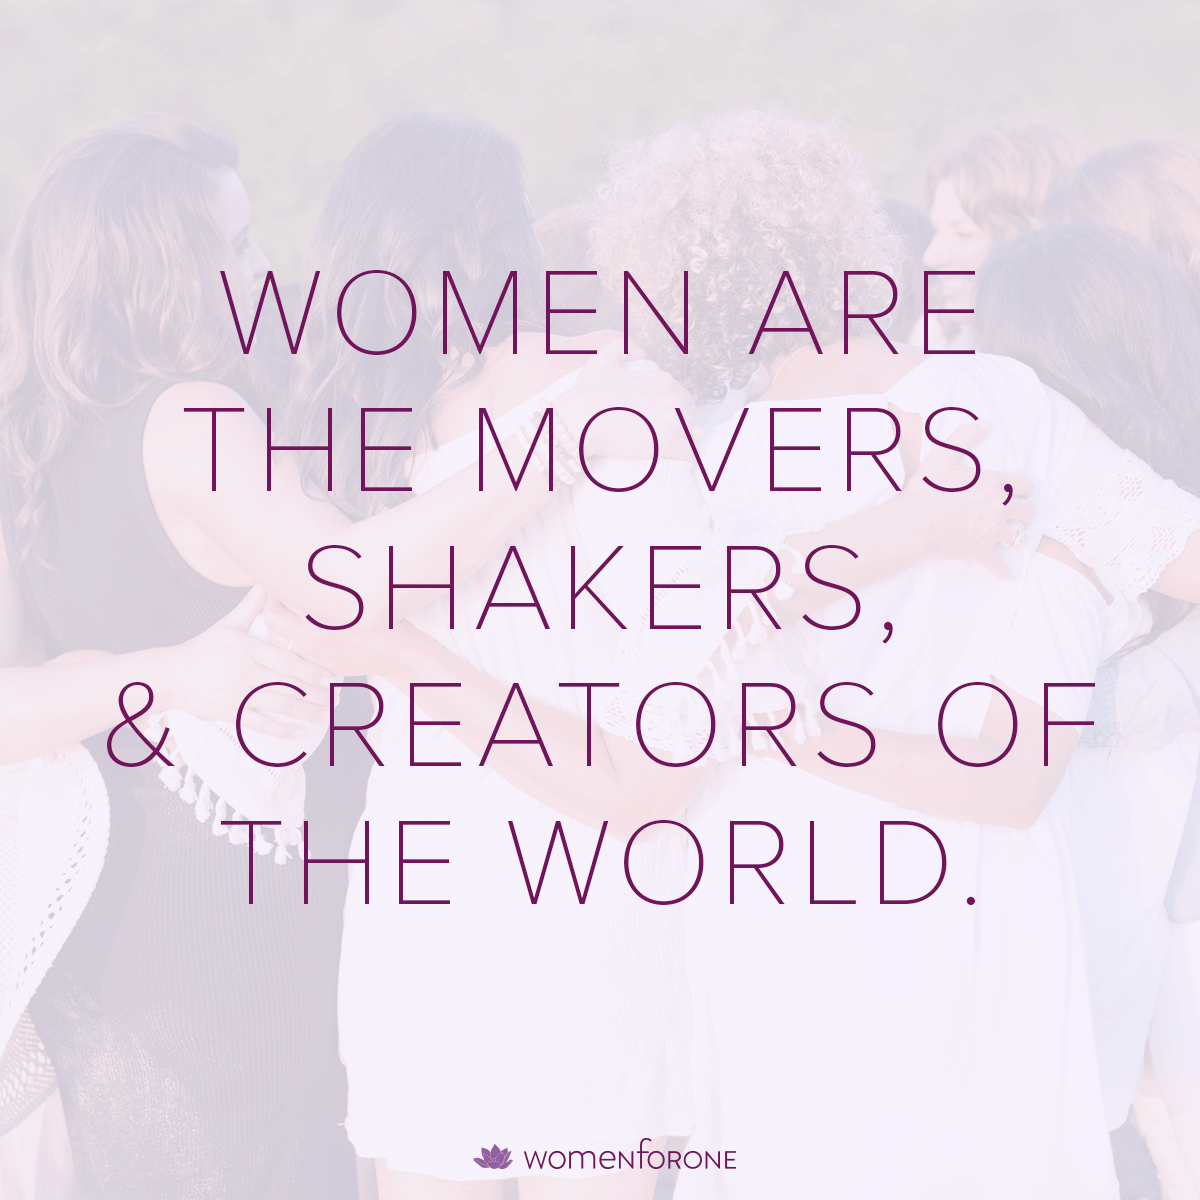 Women are the movers, shakers, and creators of the world.